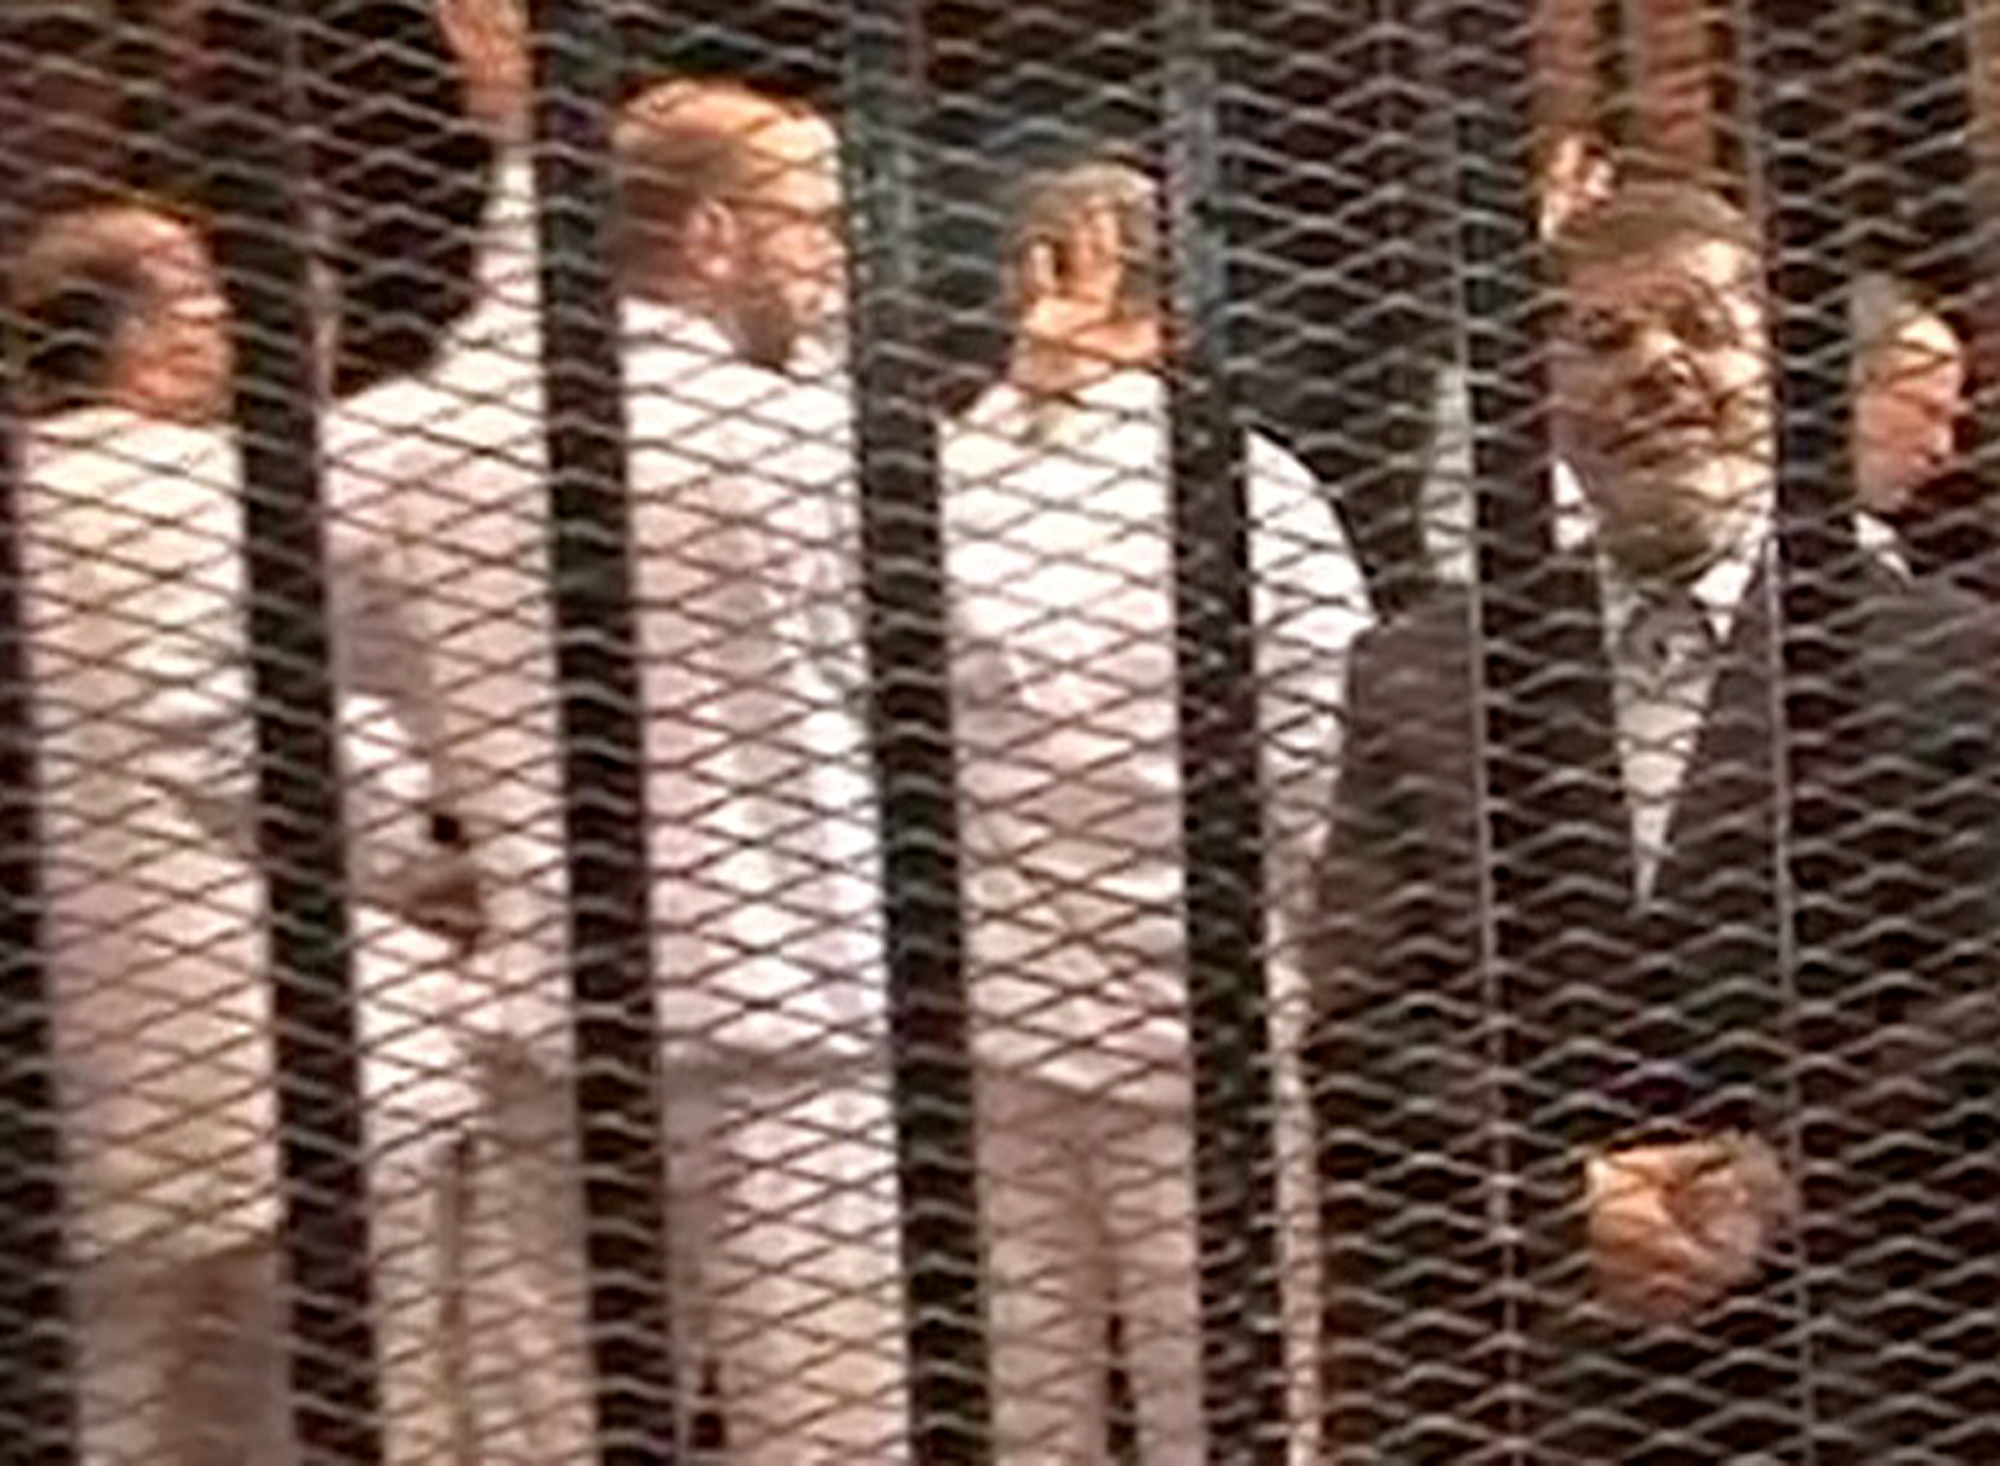 Mohammed Mursi (right) speaks from defendant's cage as he stands with co-defendants during a trial hearing in Cairo. Photo: AP